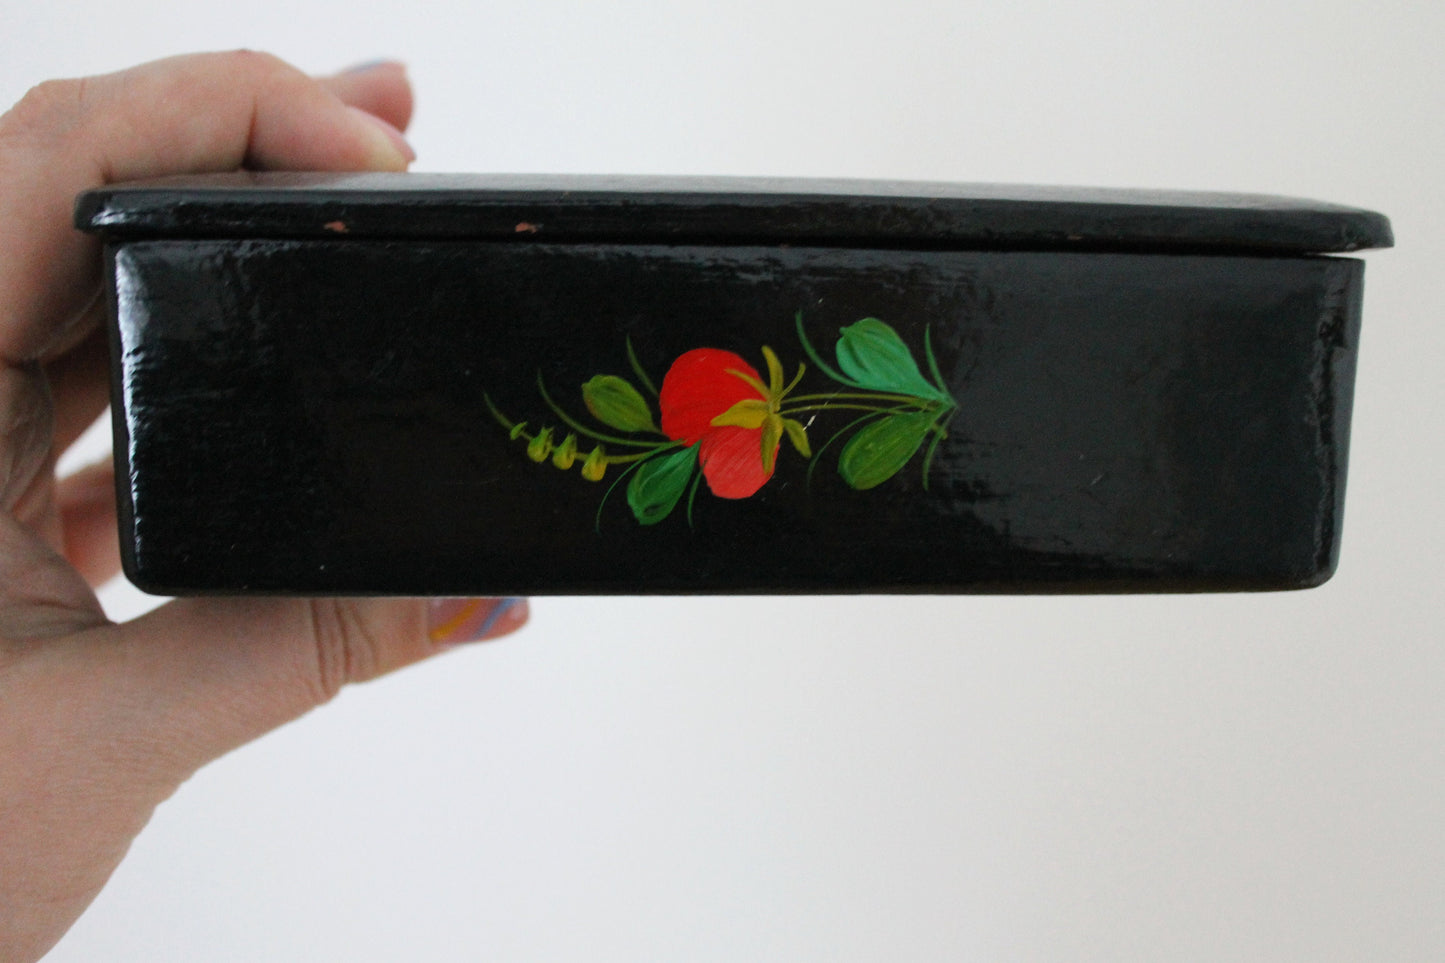 Vintage jewelry wooden box - Petrykivka box - 6.1 inches - USSR vintage - vintage flower box - made in Ukraine